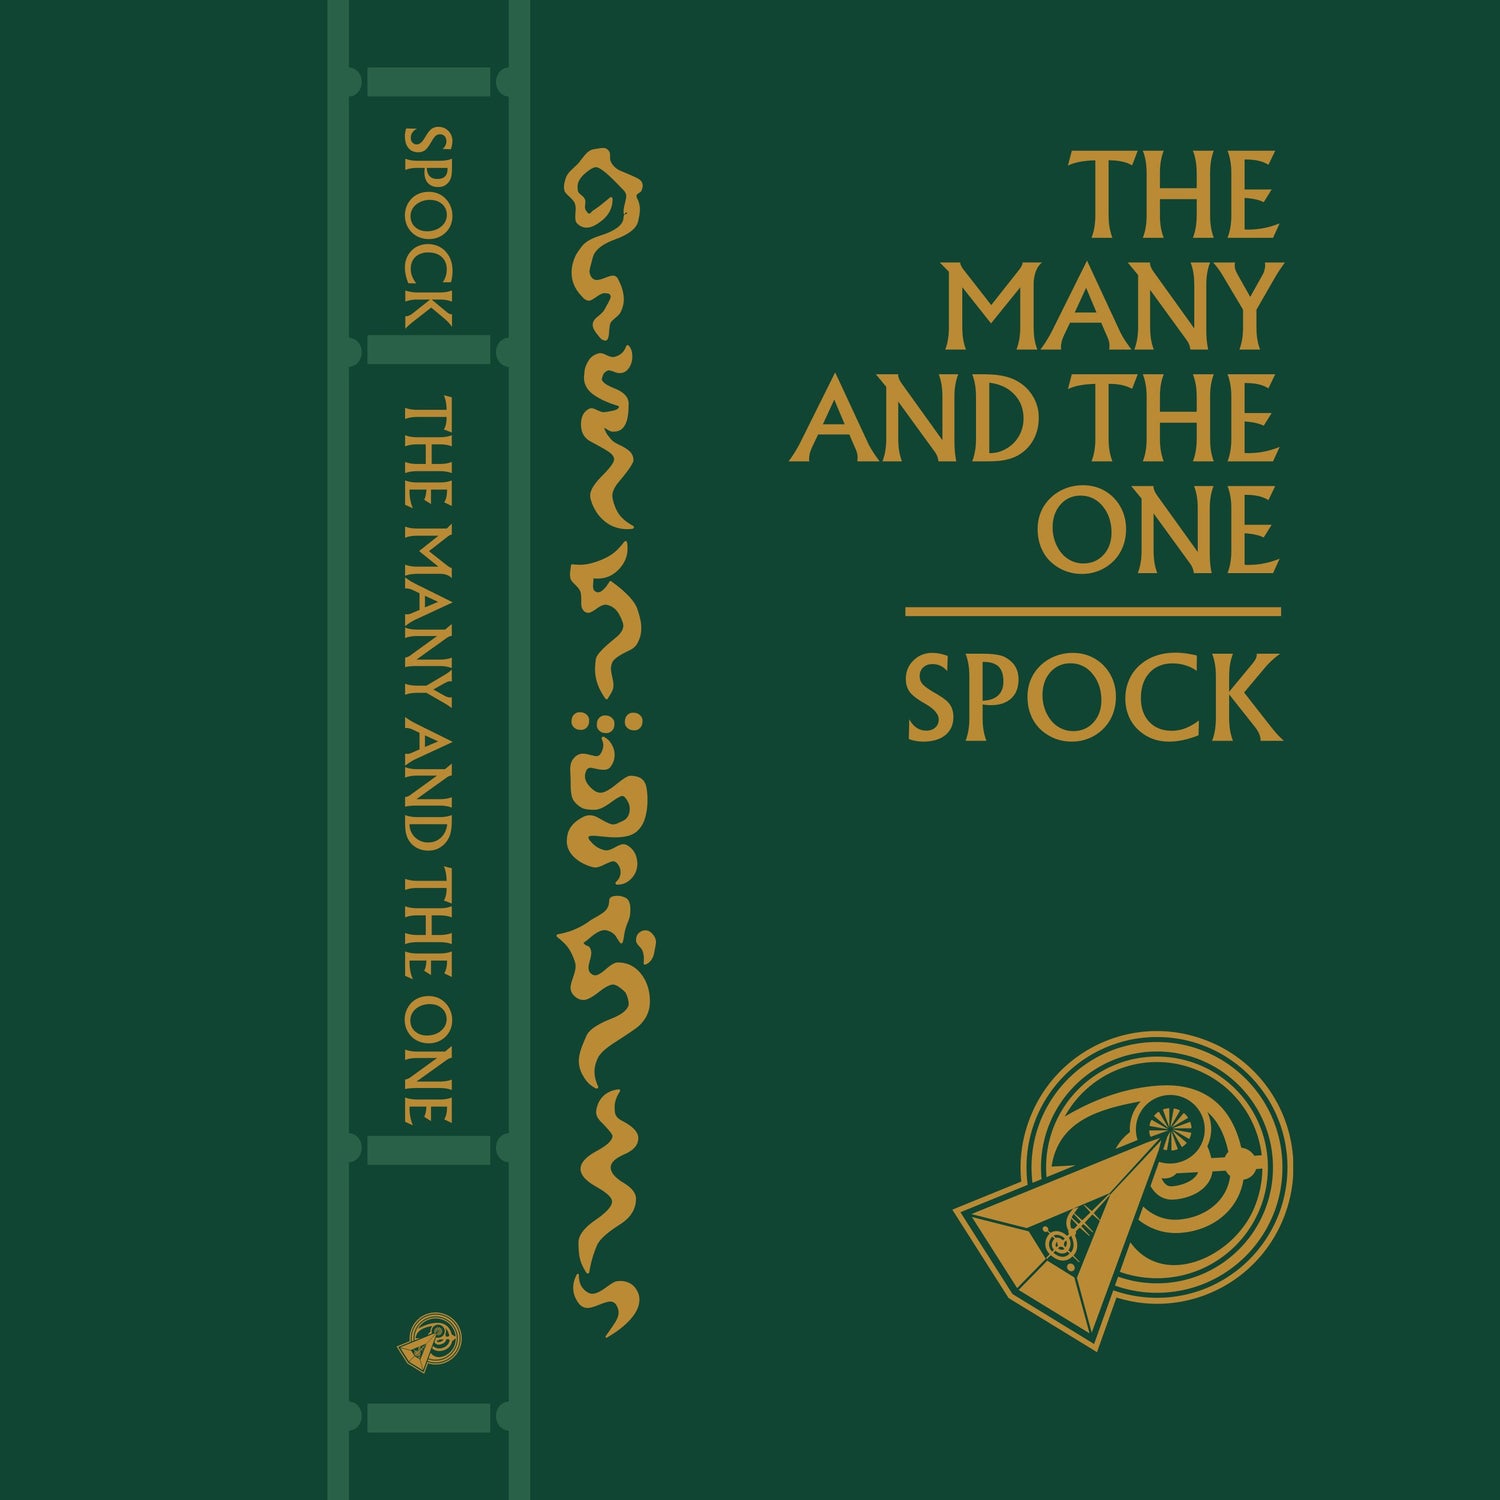 Star Trek: Picard The Many And The One Journal